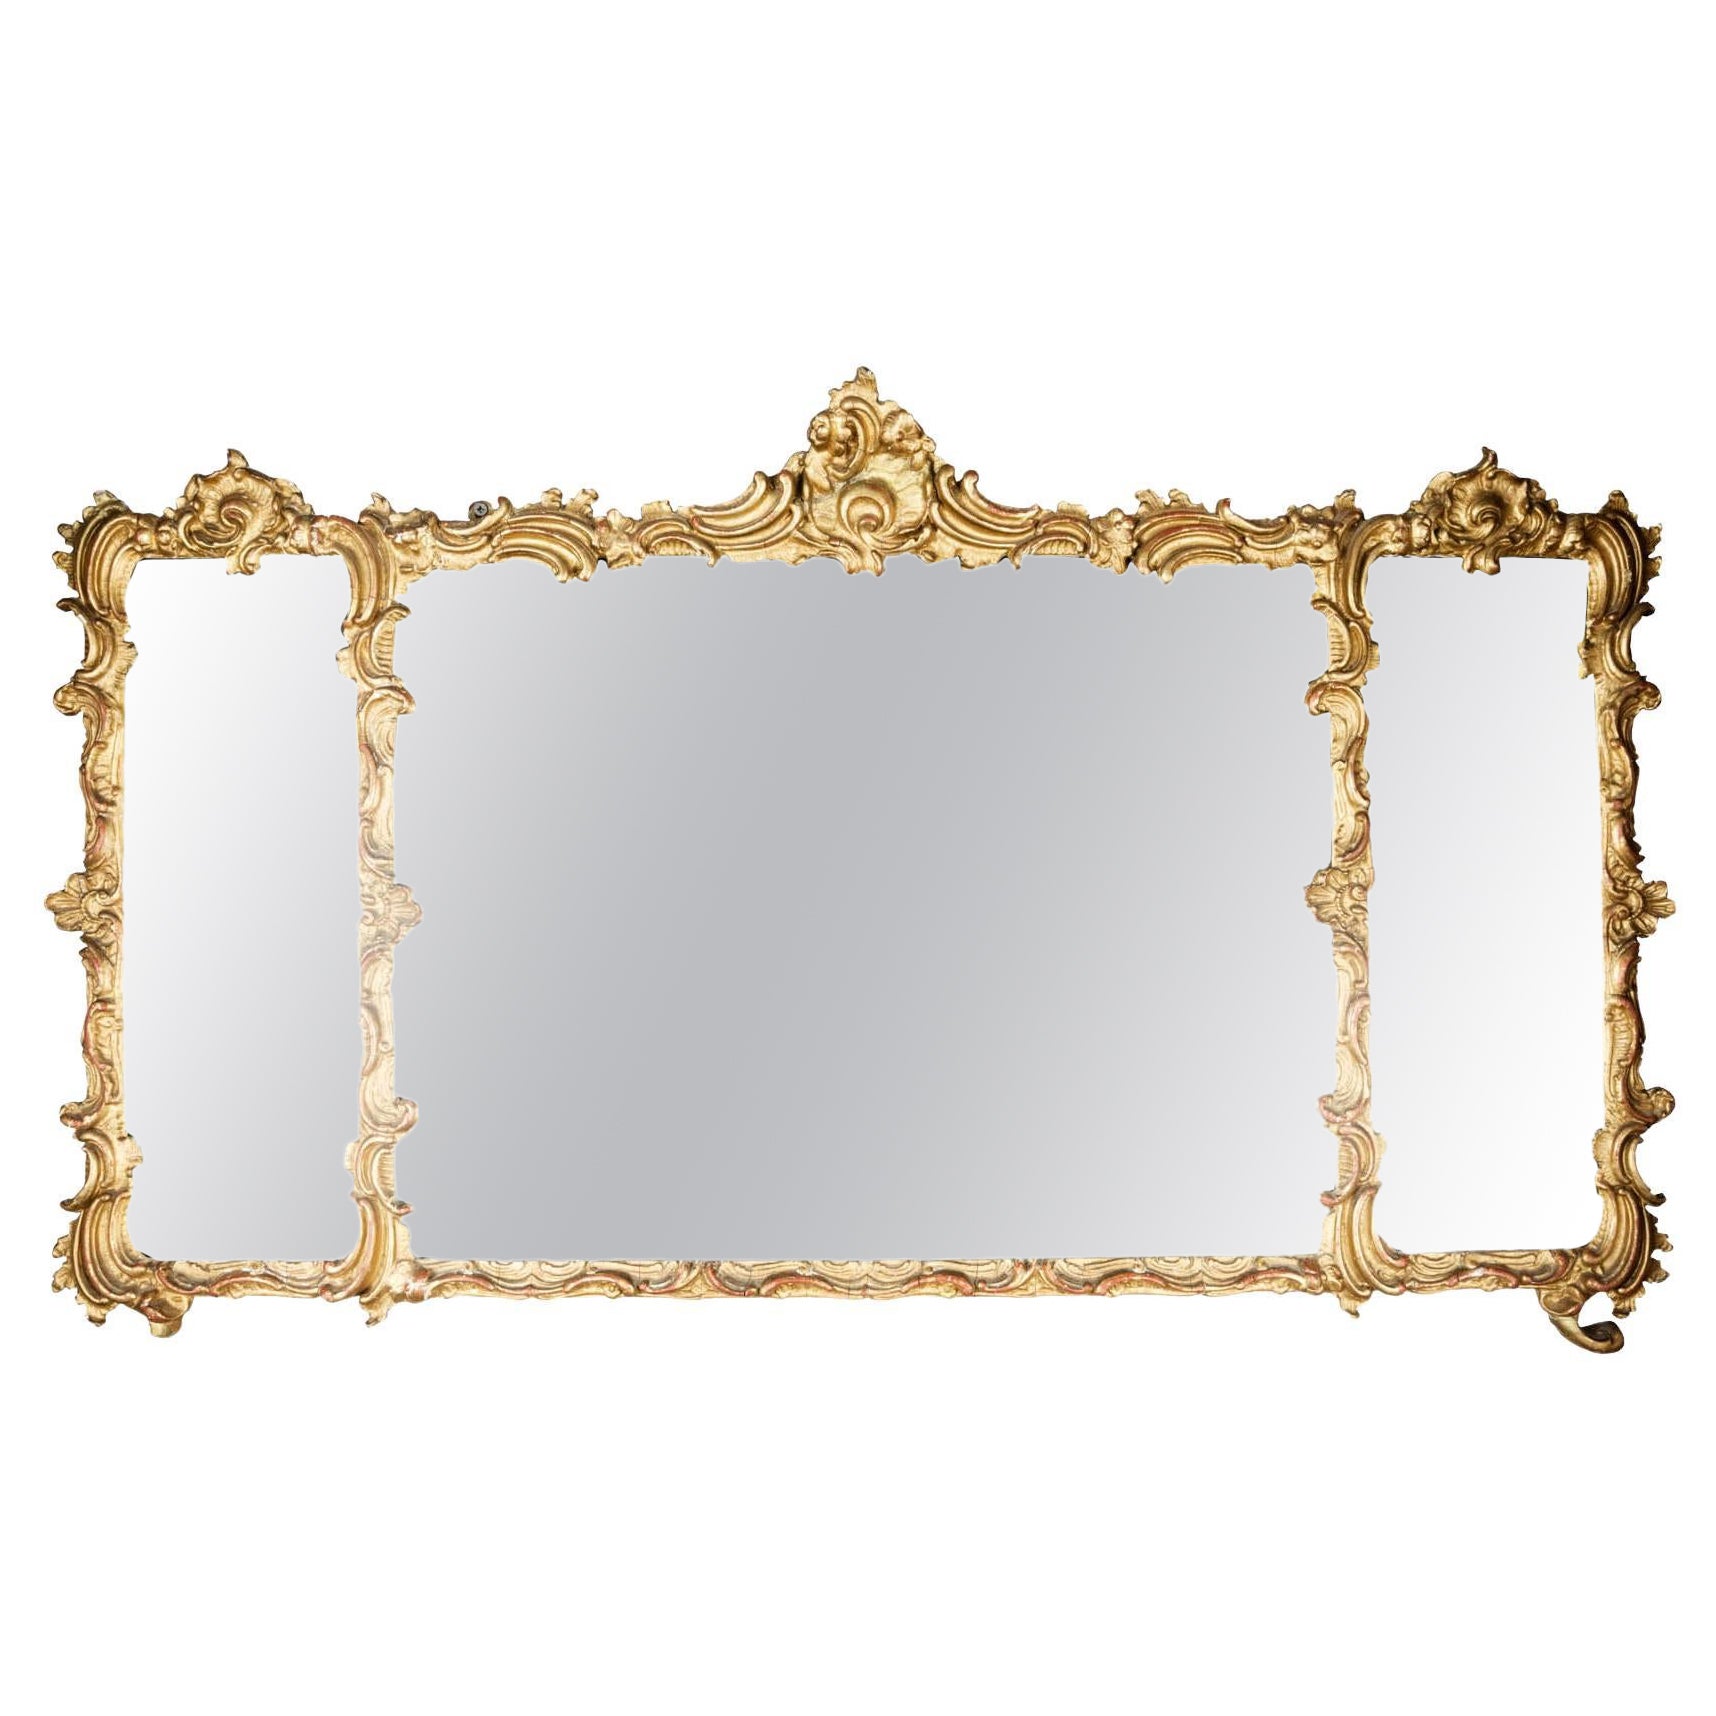 19th Century Ornately Decorated Regency Gilt Overmantel Mirror For Sale